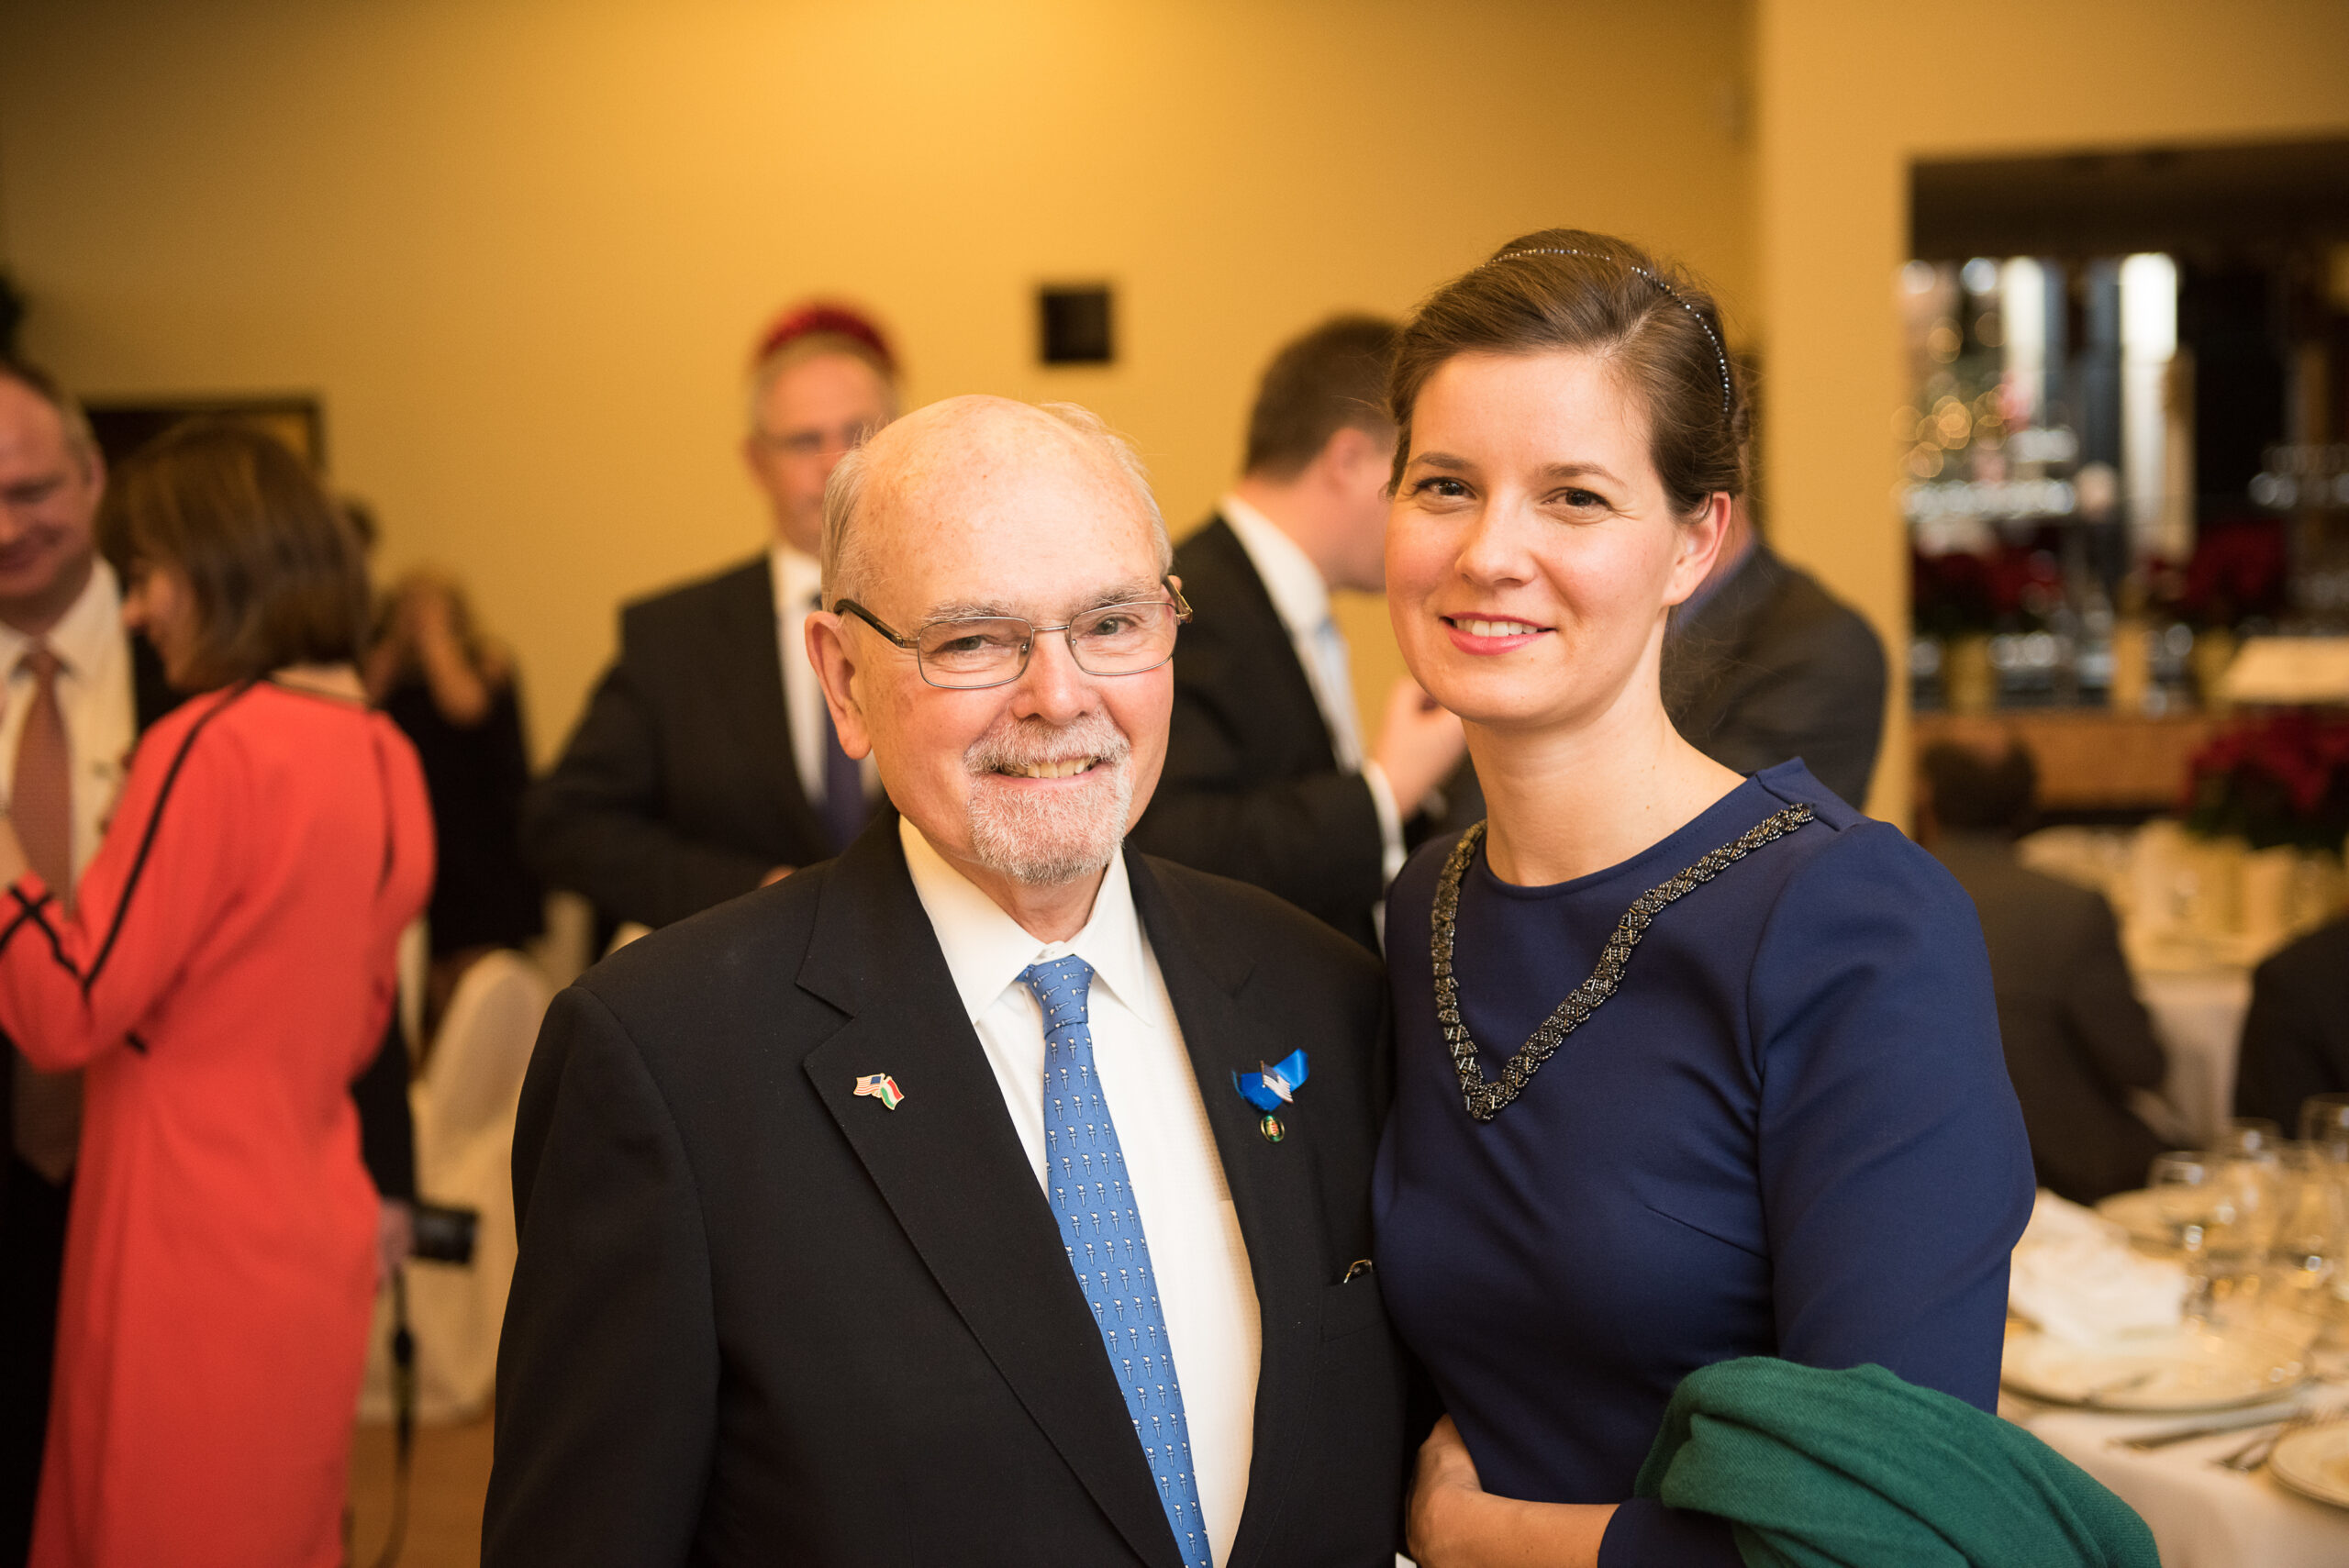 Dr. Lee Edwards (Chairman of the Victims of Communism Memorial Foundation) and Mrs. Anna Smith Lacey (Executive Director of The Hungary Initiatives Foundation)